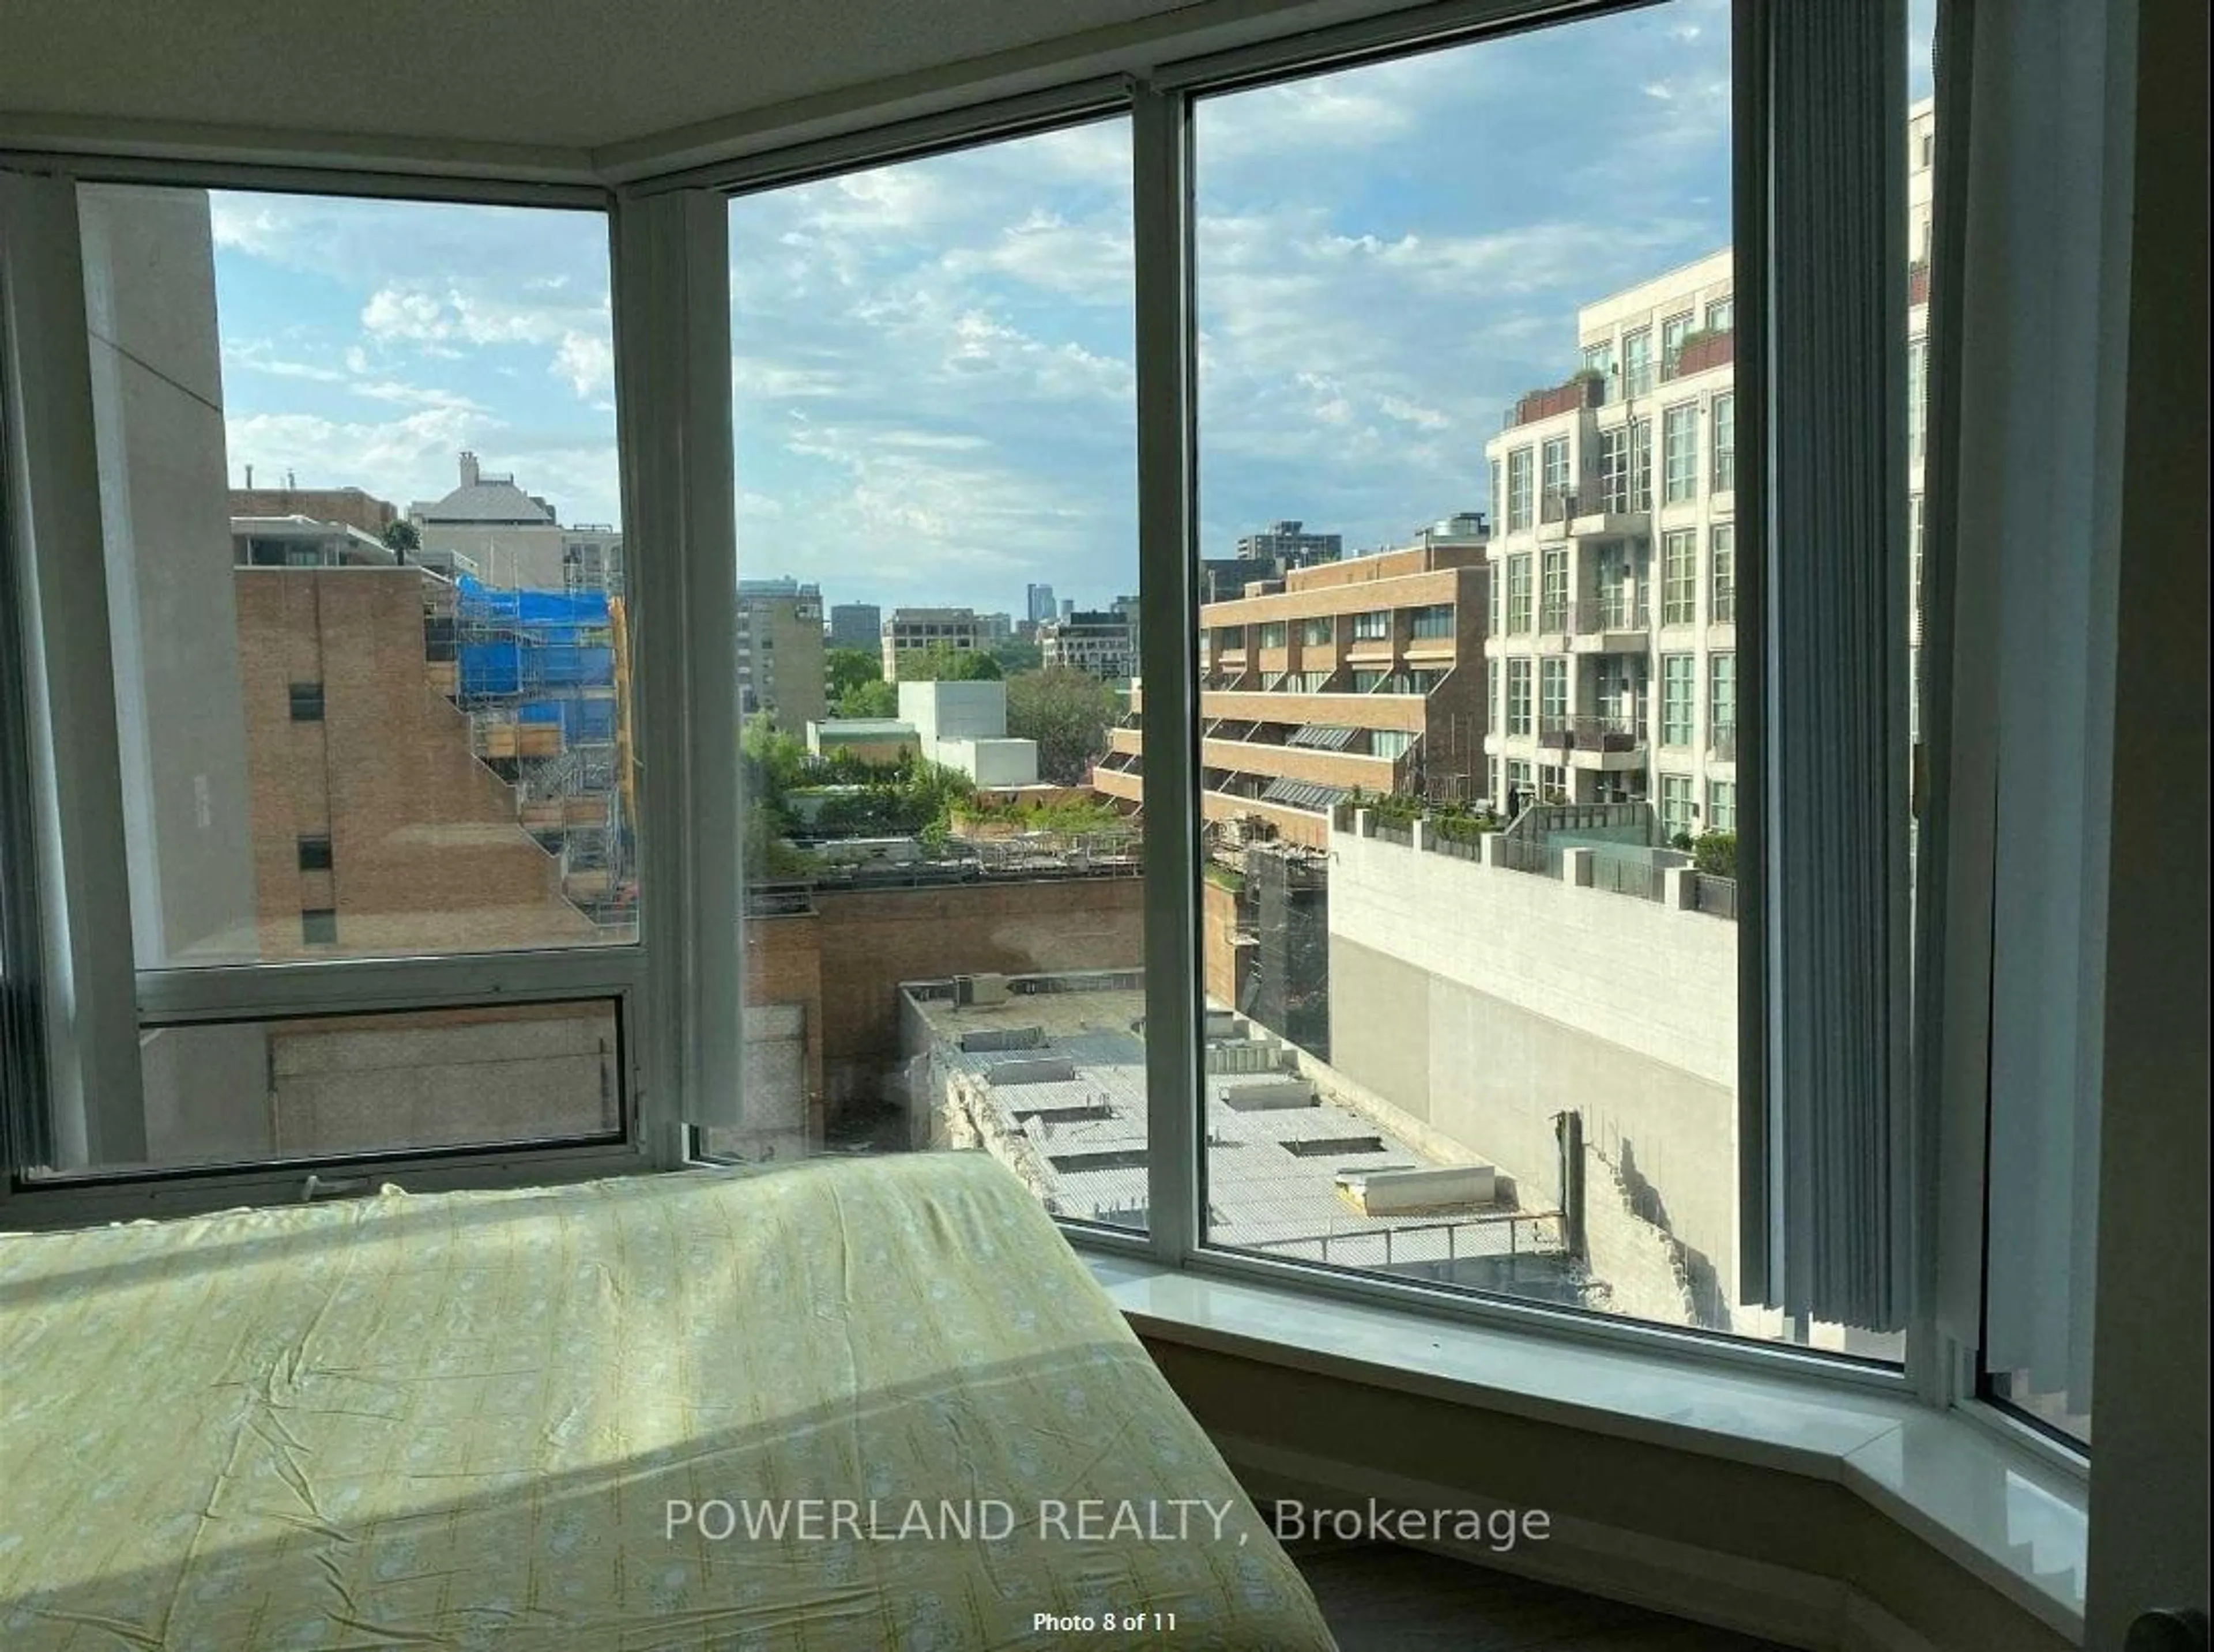 Balcony in the apartment for 155 Yorkville Ave #604, Toronto Ontario M5R 1C4